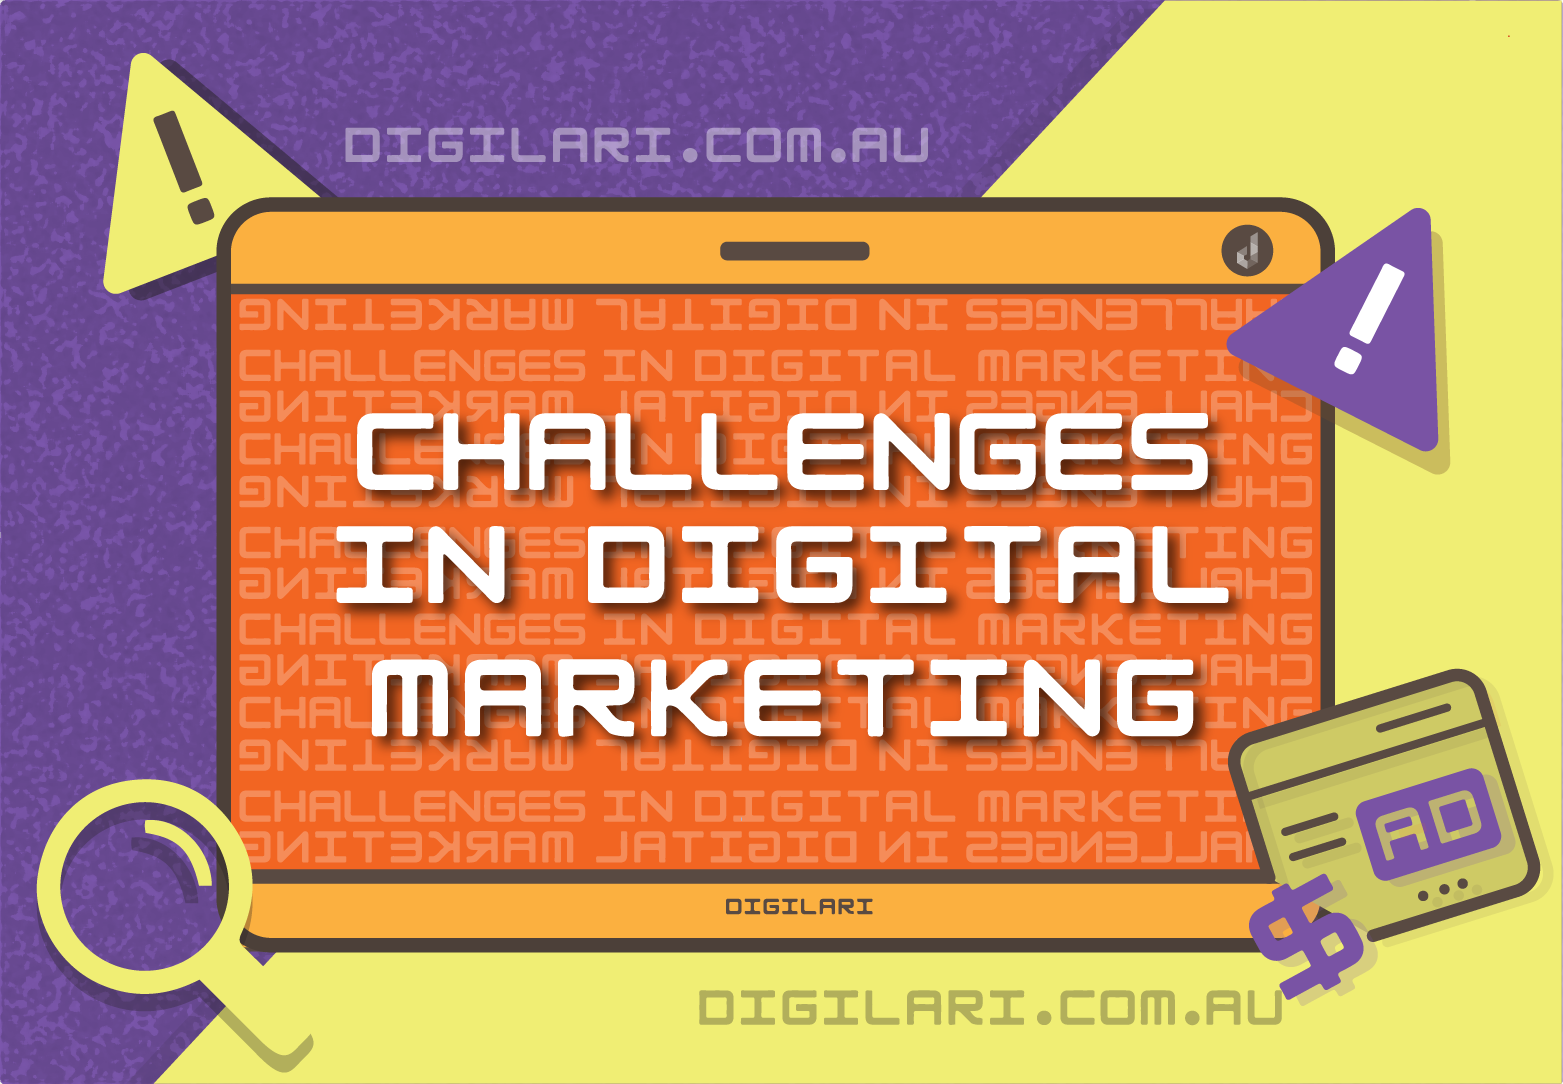 Top 3 Struggles and Challenges in the Digital Marketing Industry